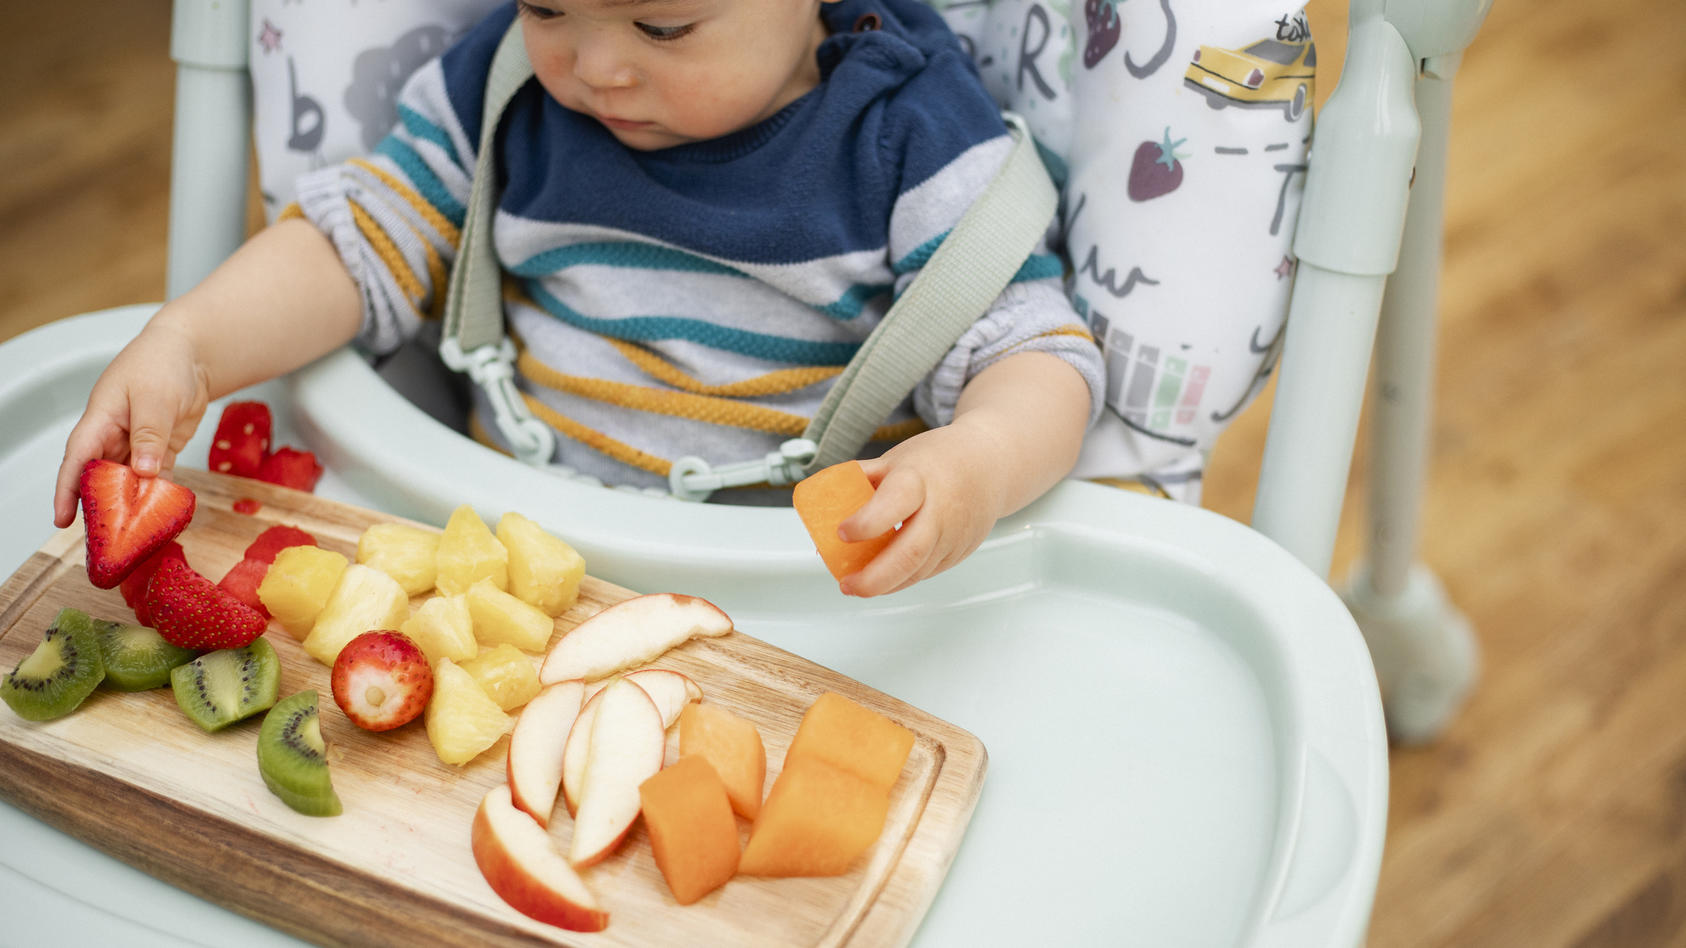 Baby led-weaning: Baby isst Obst